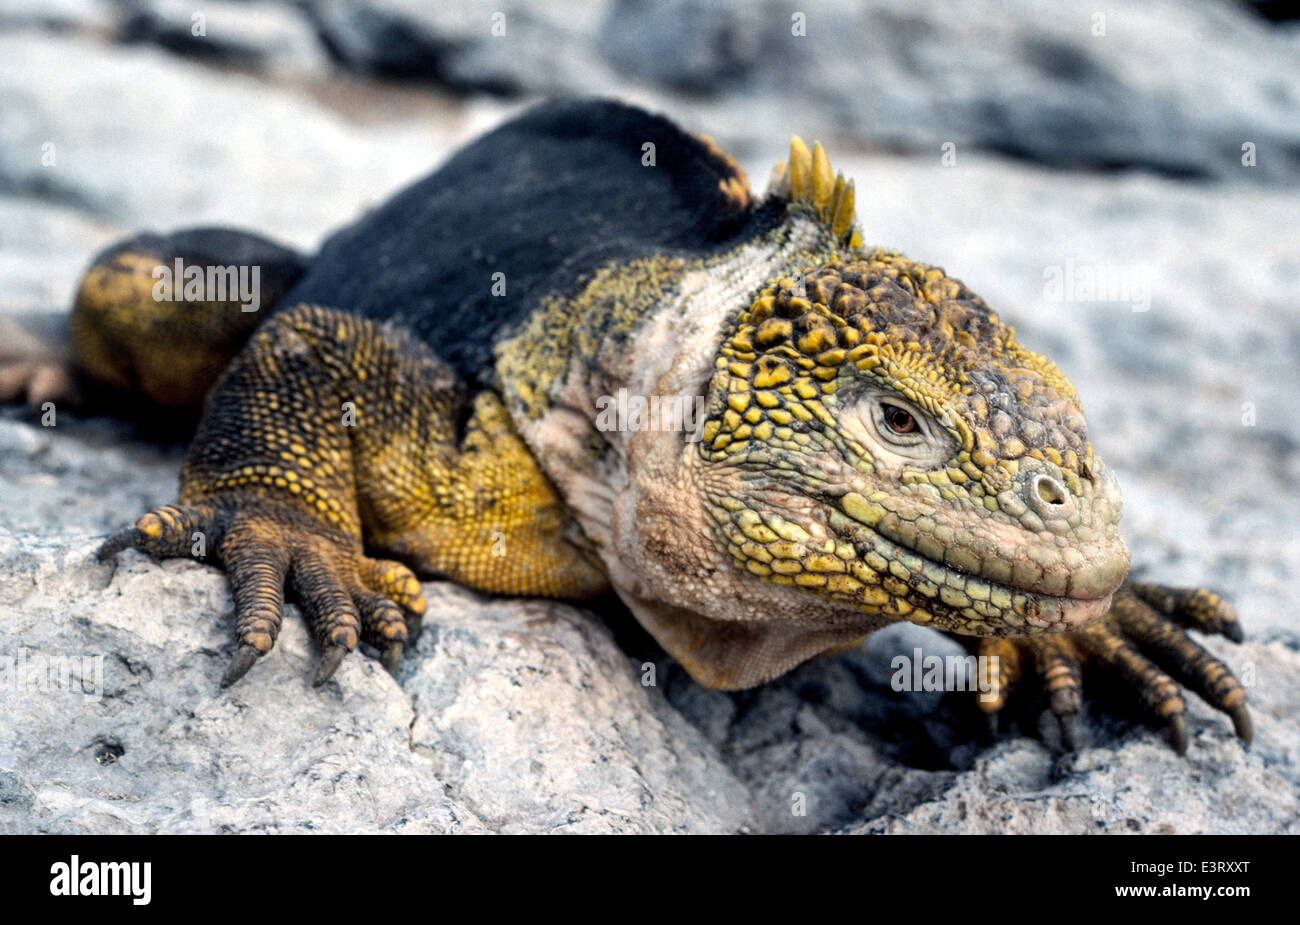 A portrait of the scaly-skinned Galapagos land iguana on South Plaza Island in the Galapagos Islands, a province of Ecuador, South America. Stock Photo